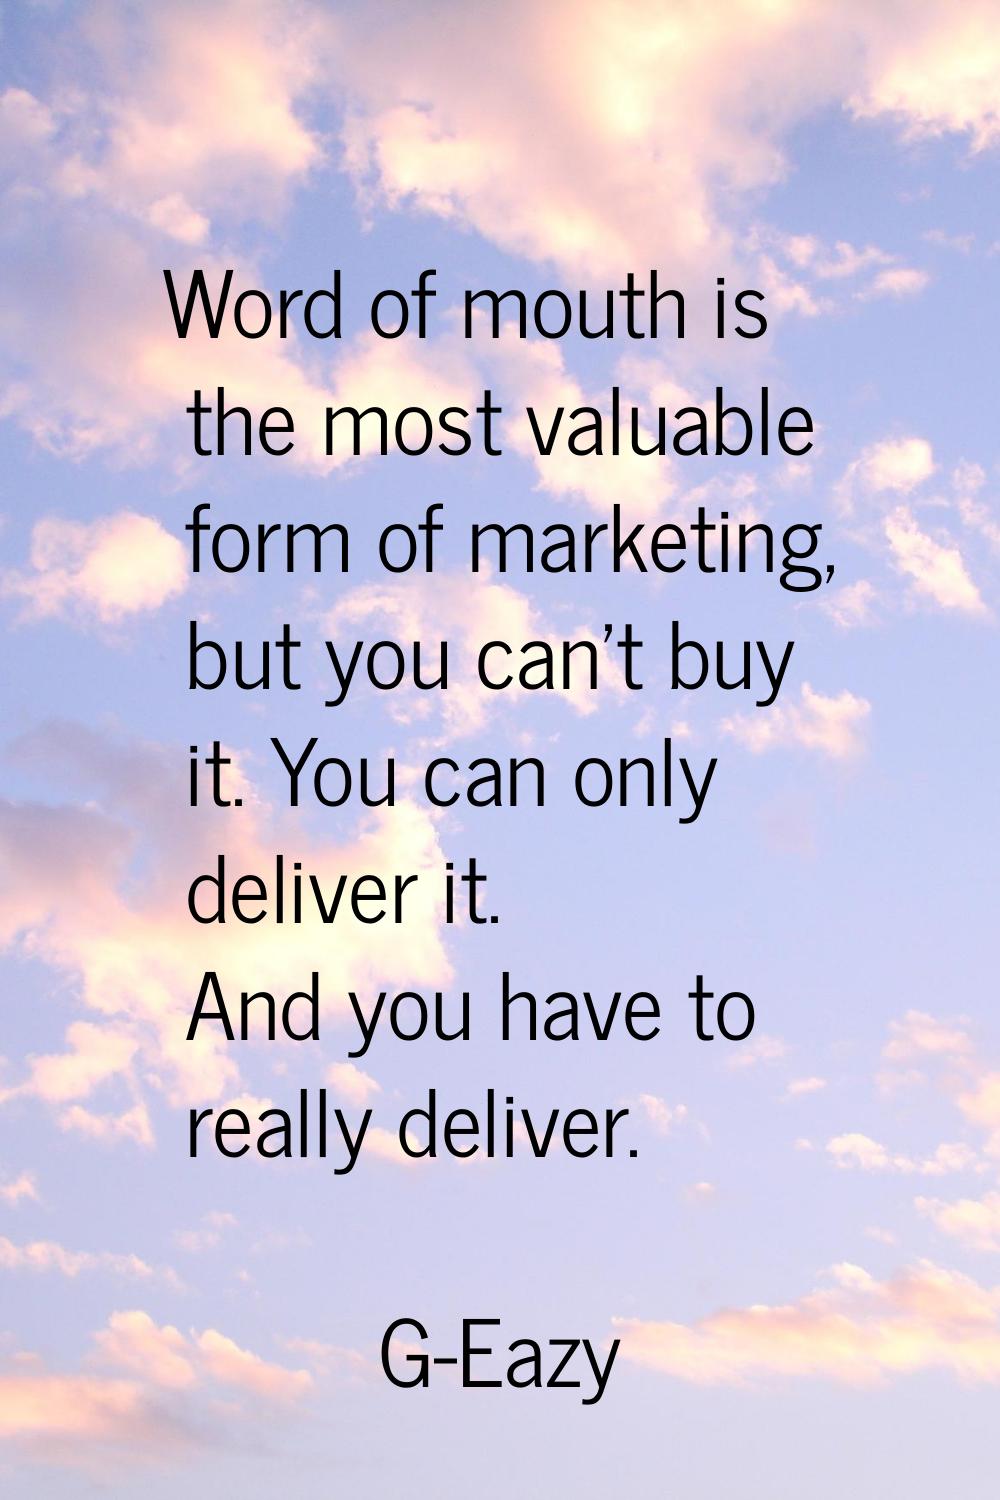 Word of mouth is the most valuable form of marketing, but you can't buy it. You can only deliver it